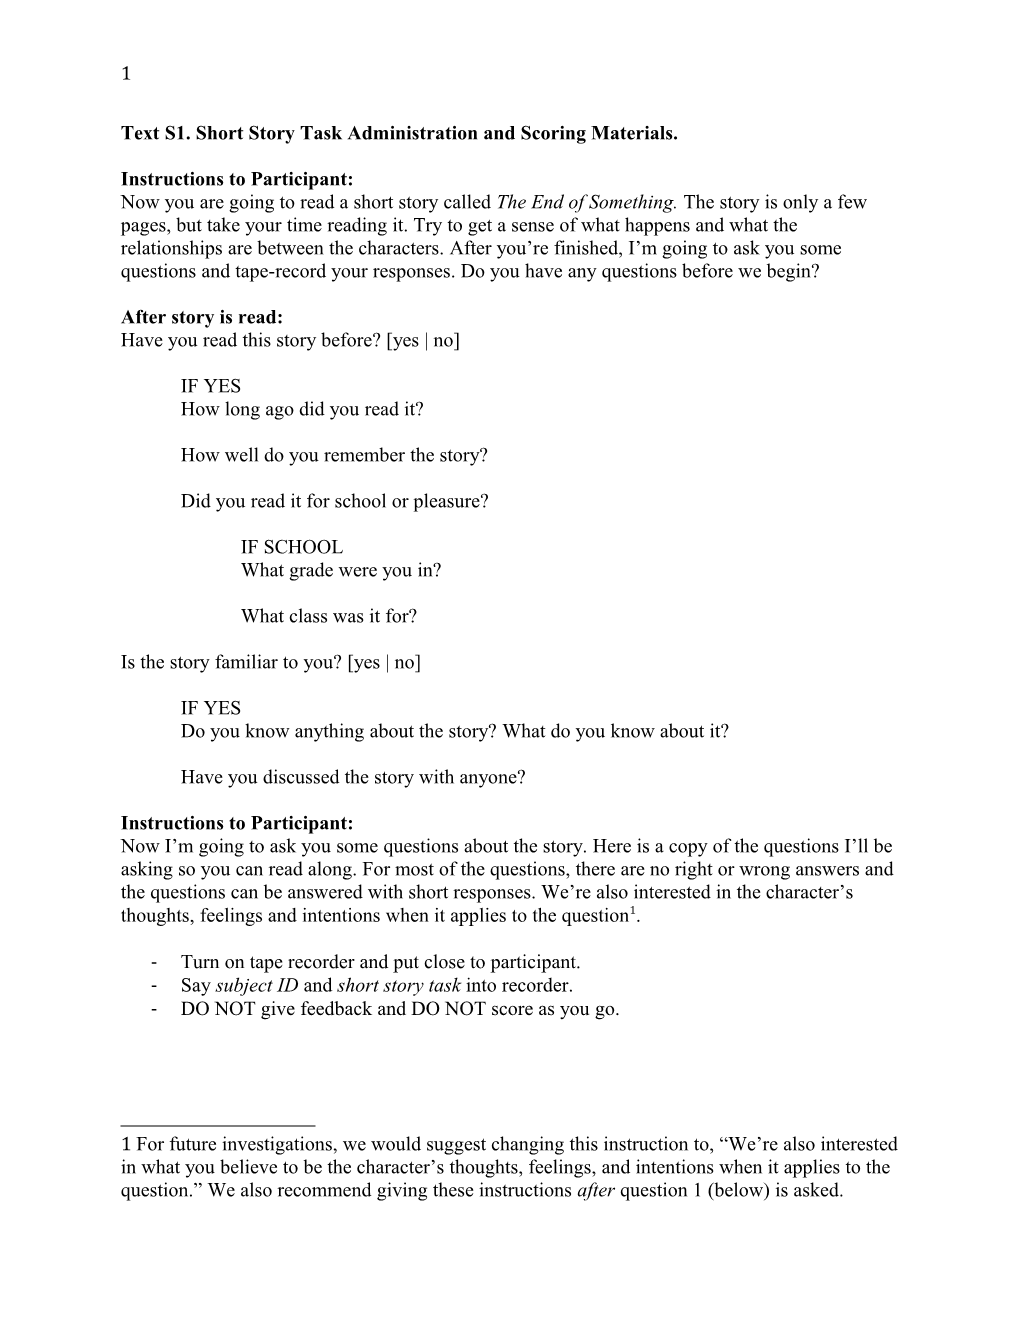 Text S1. Short Story Task Administration and Scoring Materials